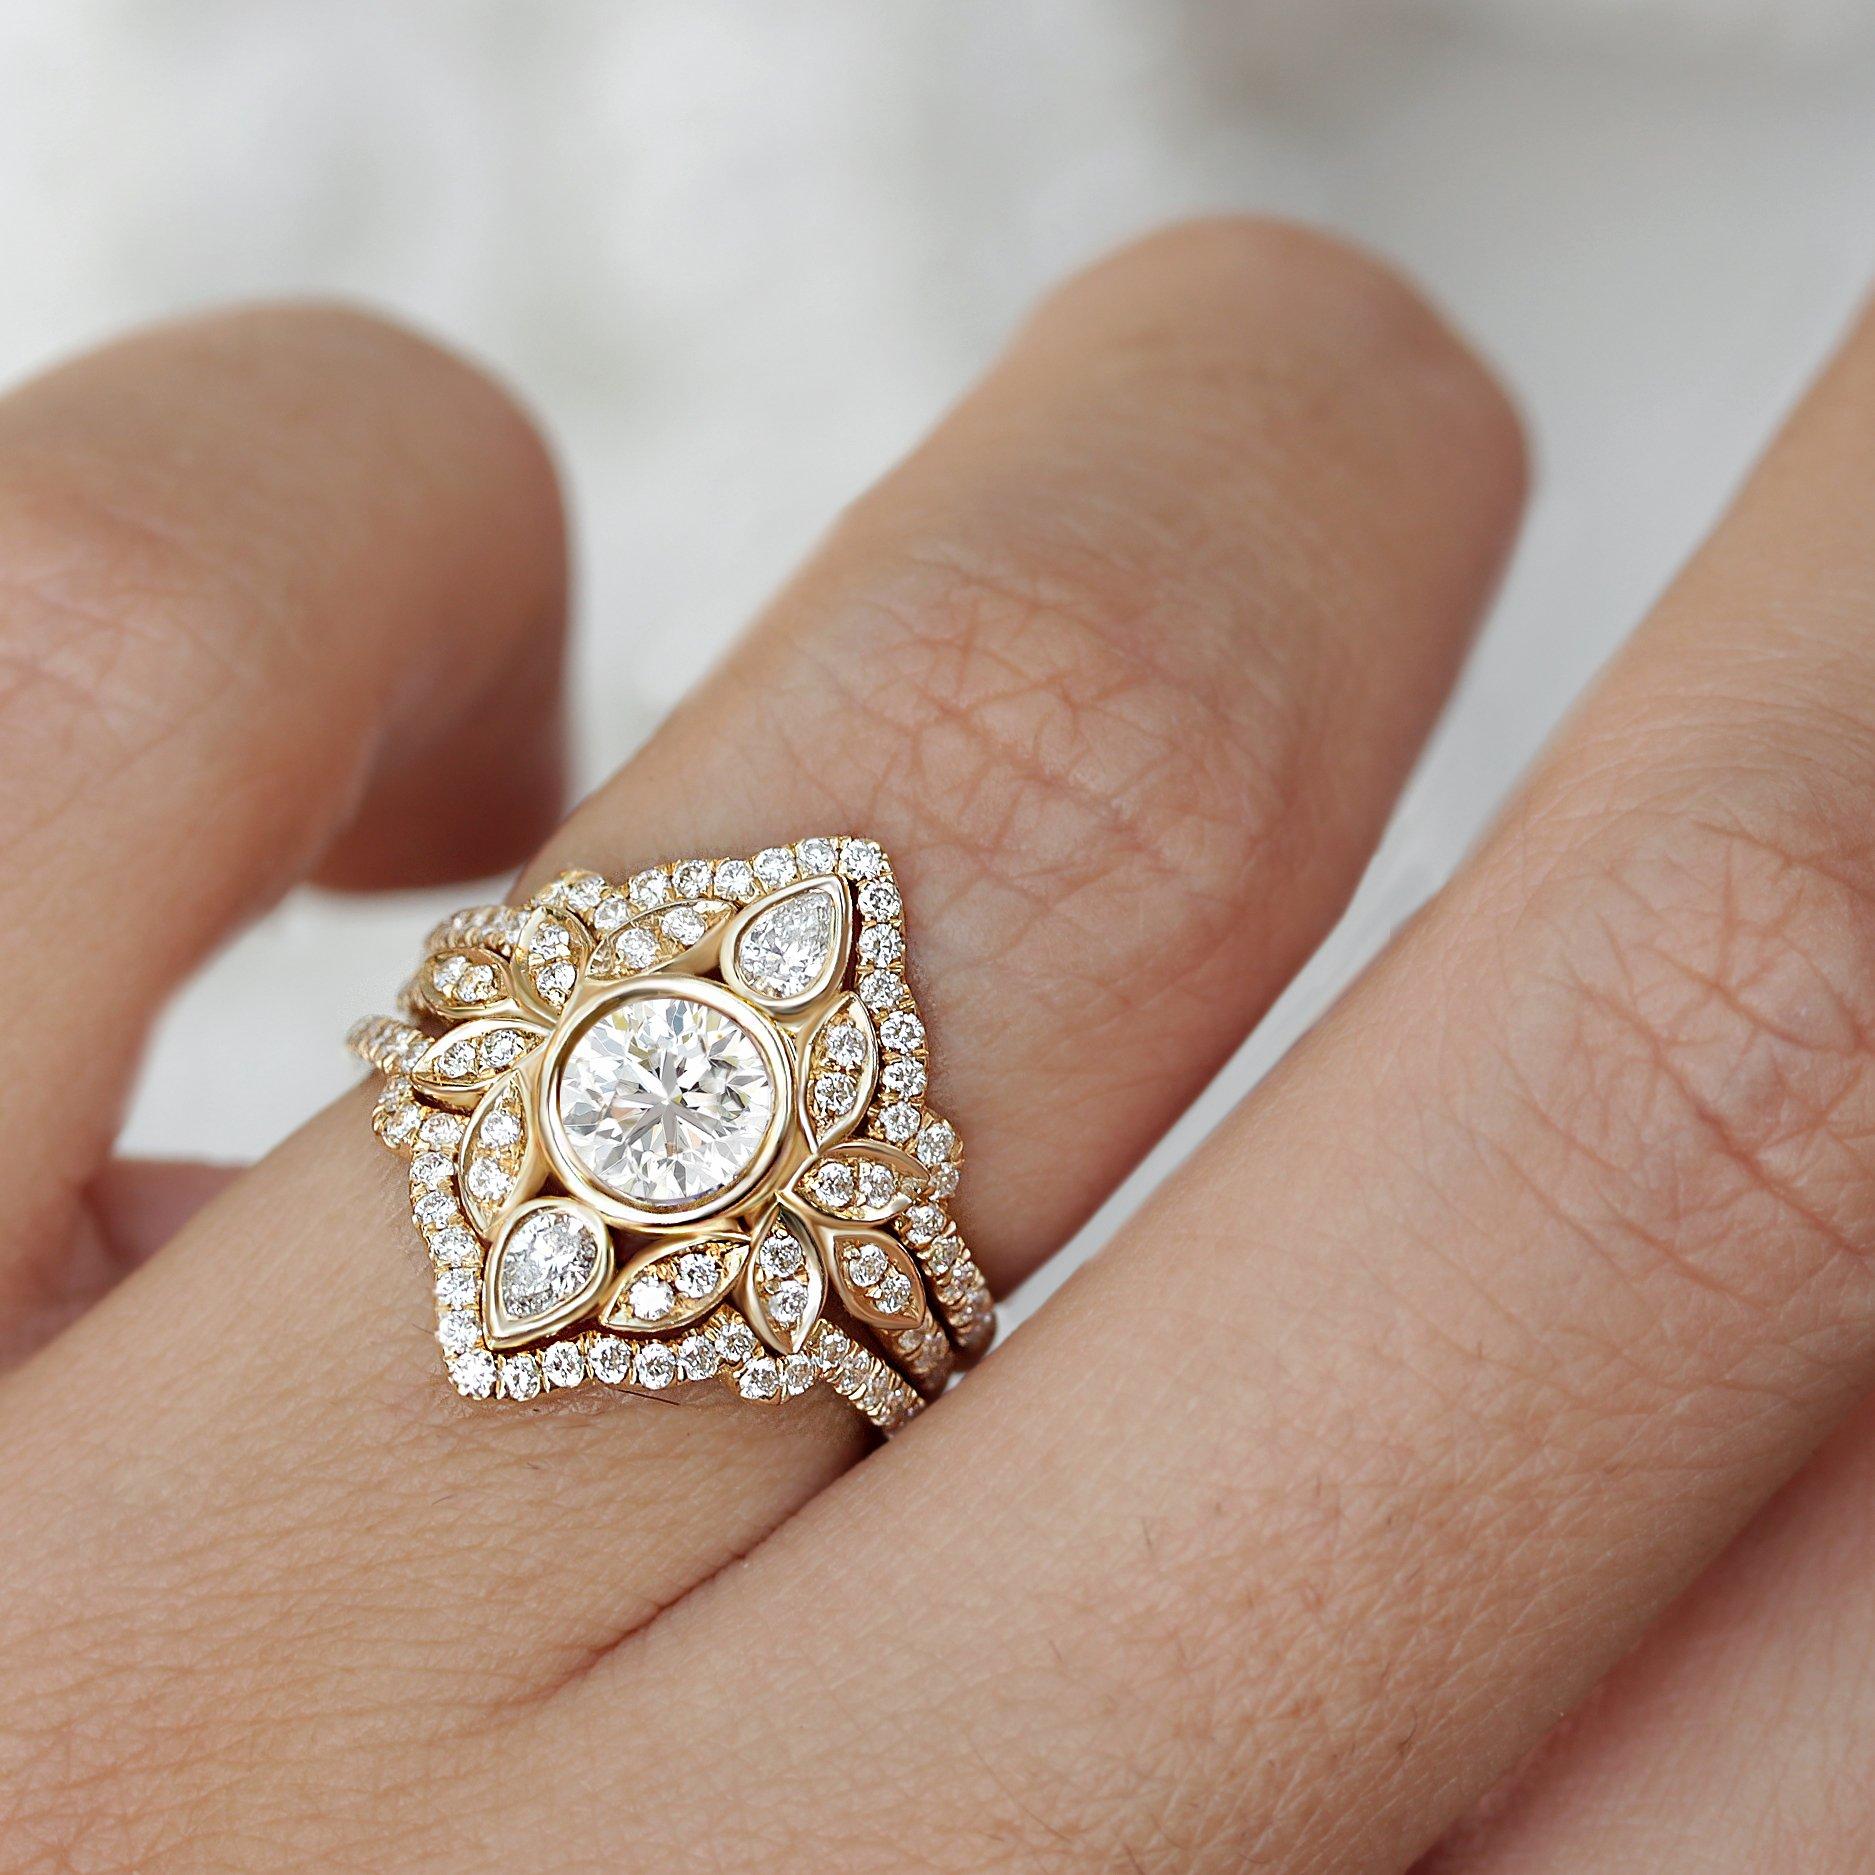 Lily #5 Iced frame Diamond Flower Engagement Two Ring Set.
